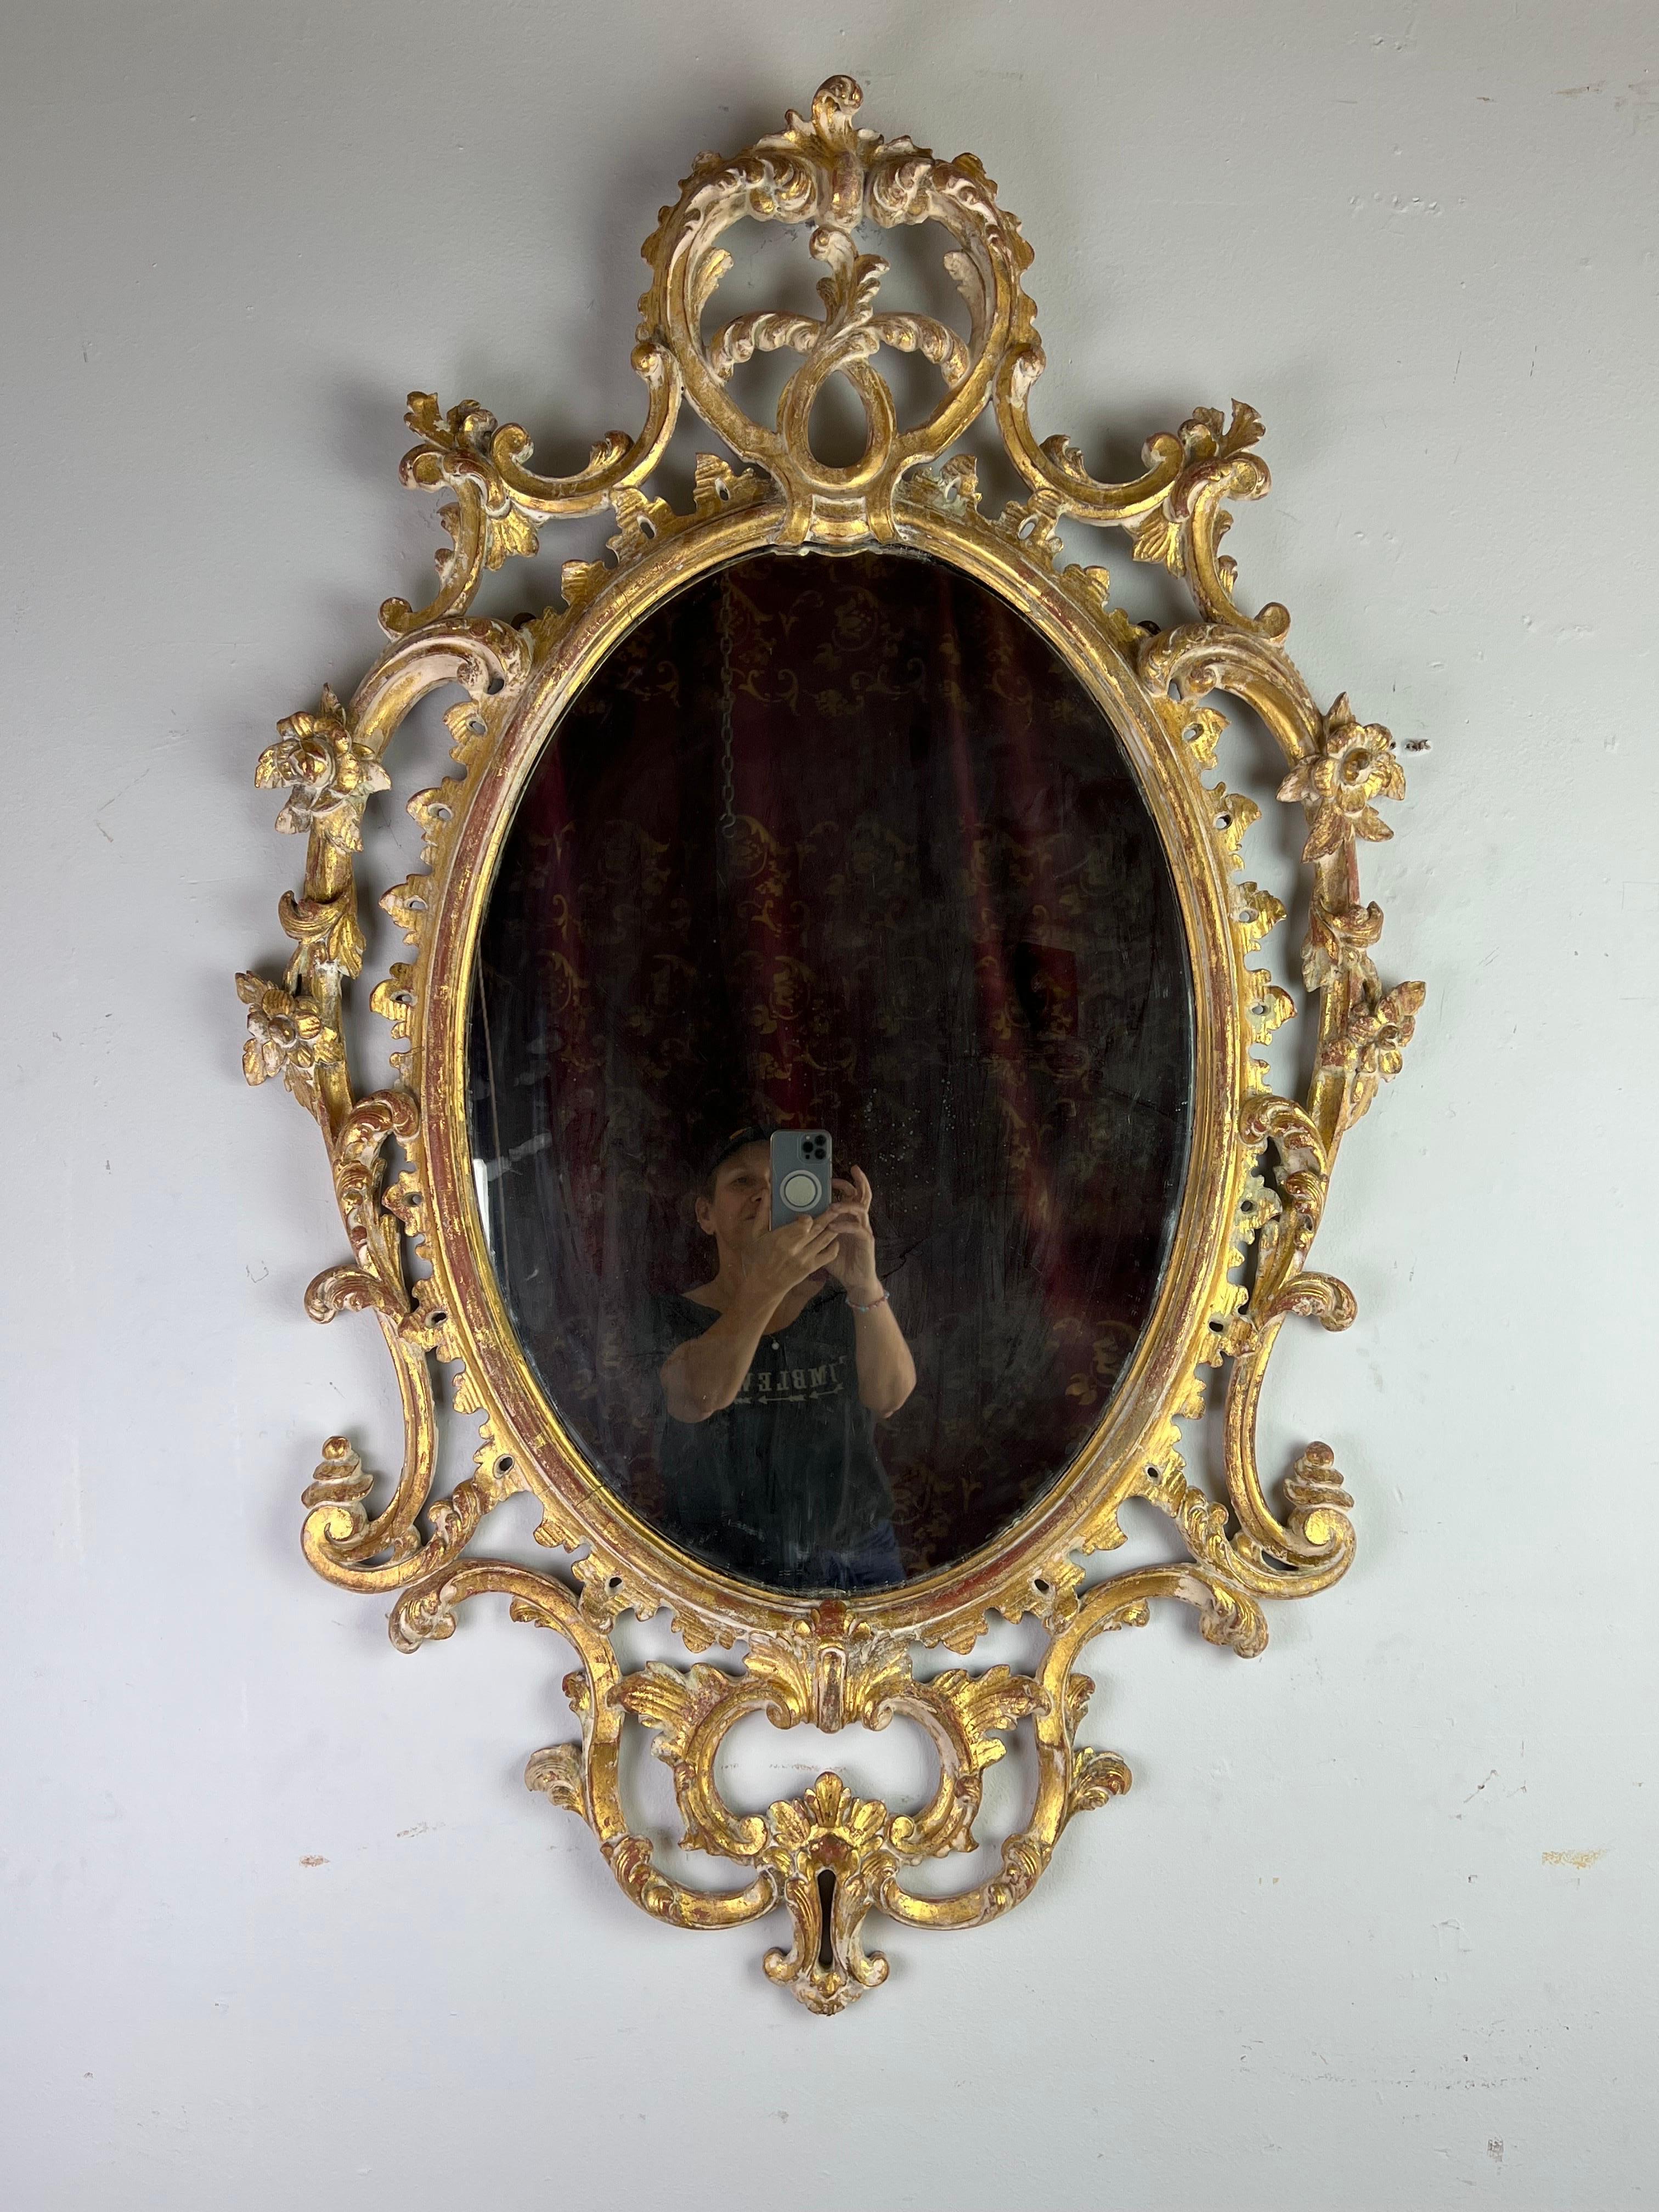 19th century French Rococo style gilt wood mirror. The frame has carved flowers and acanthus leaves throughout. Distressed gold leaf finish with exposed wood.